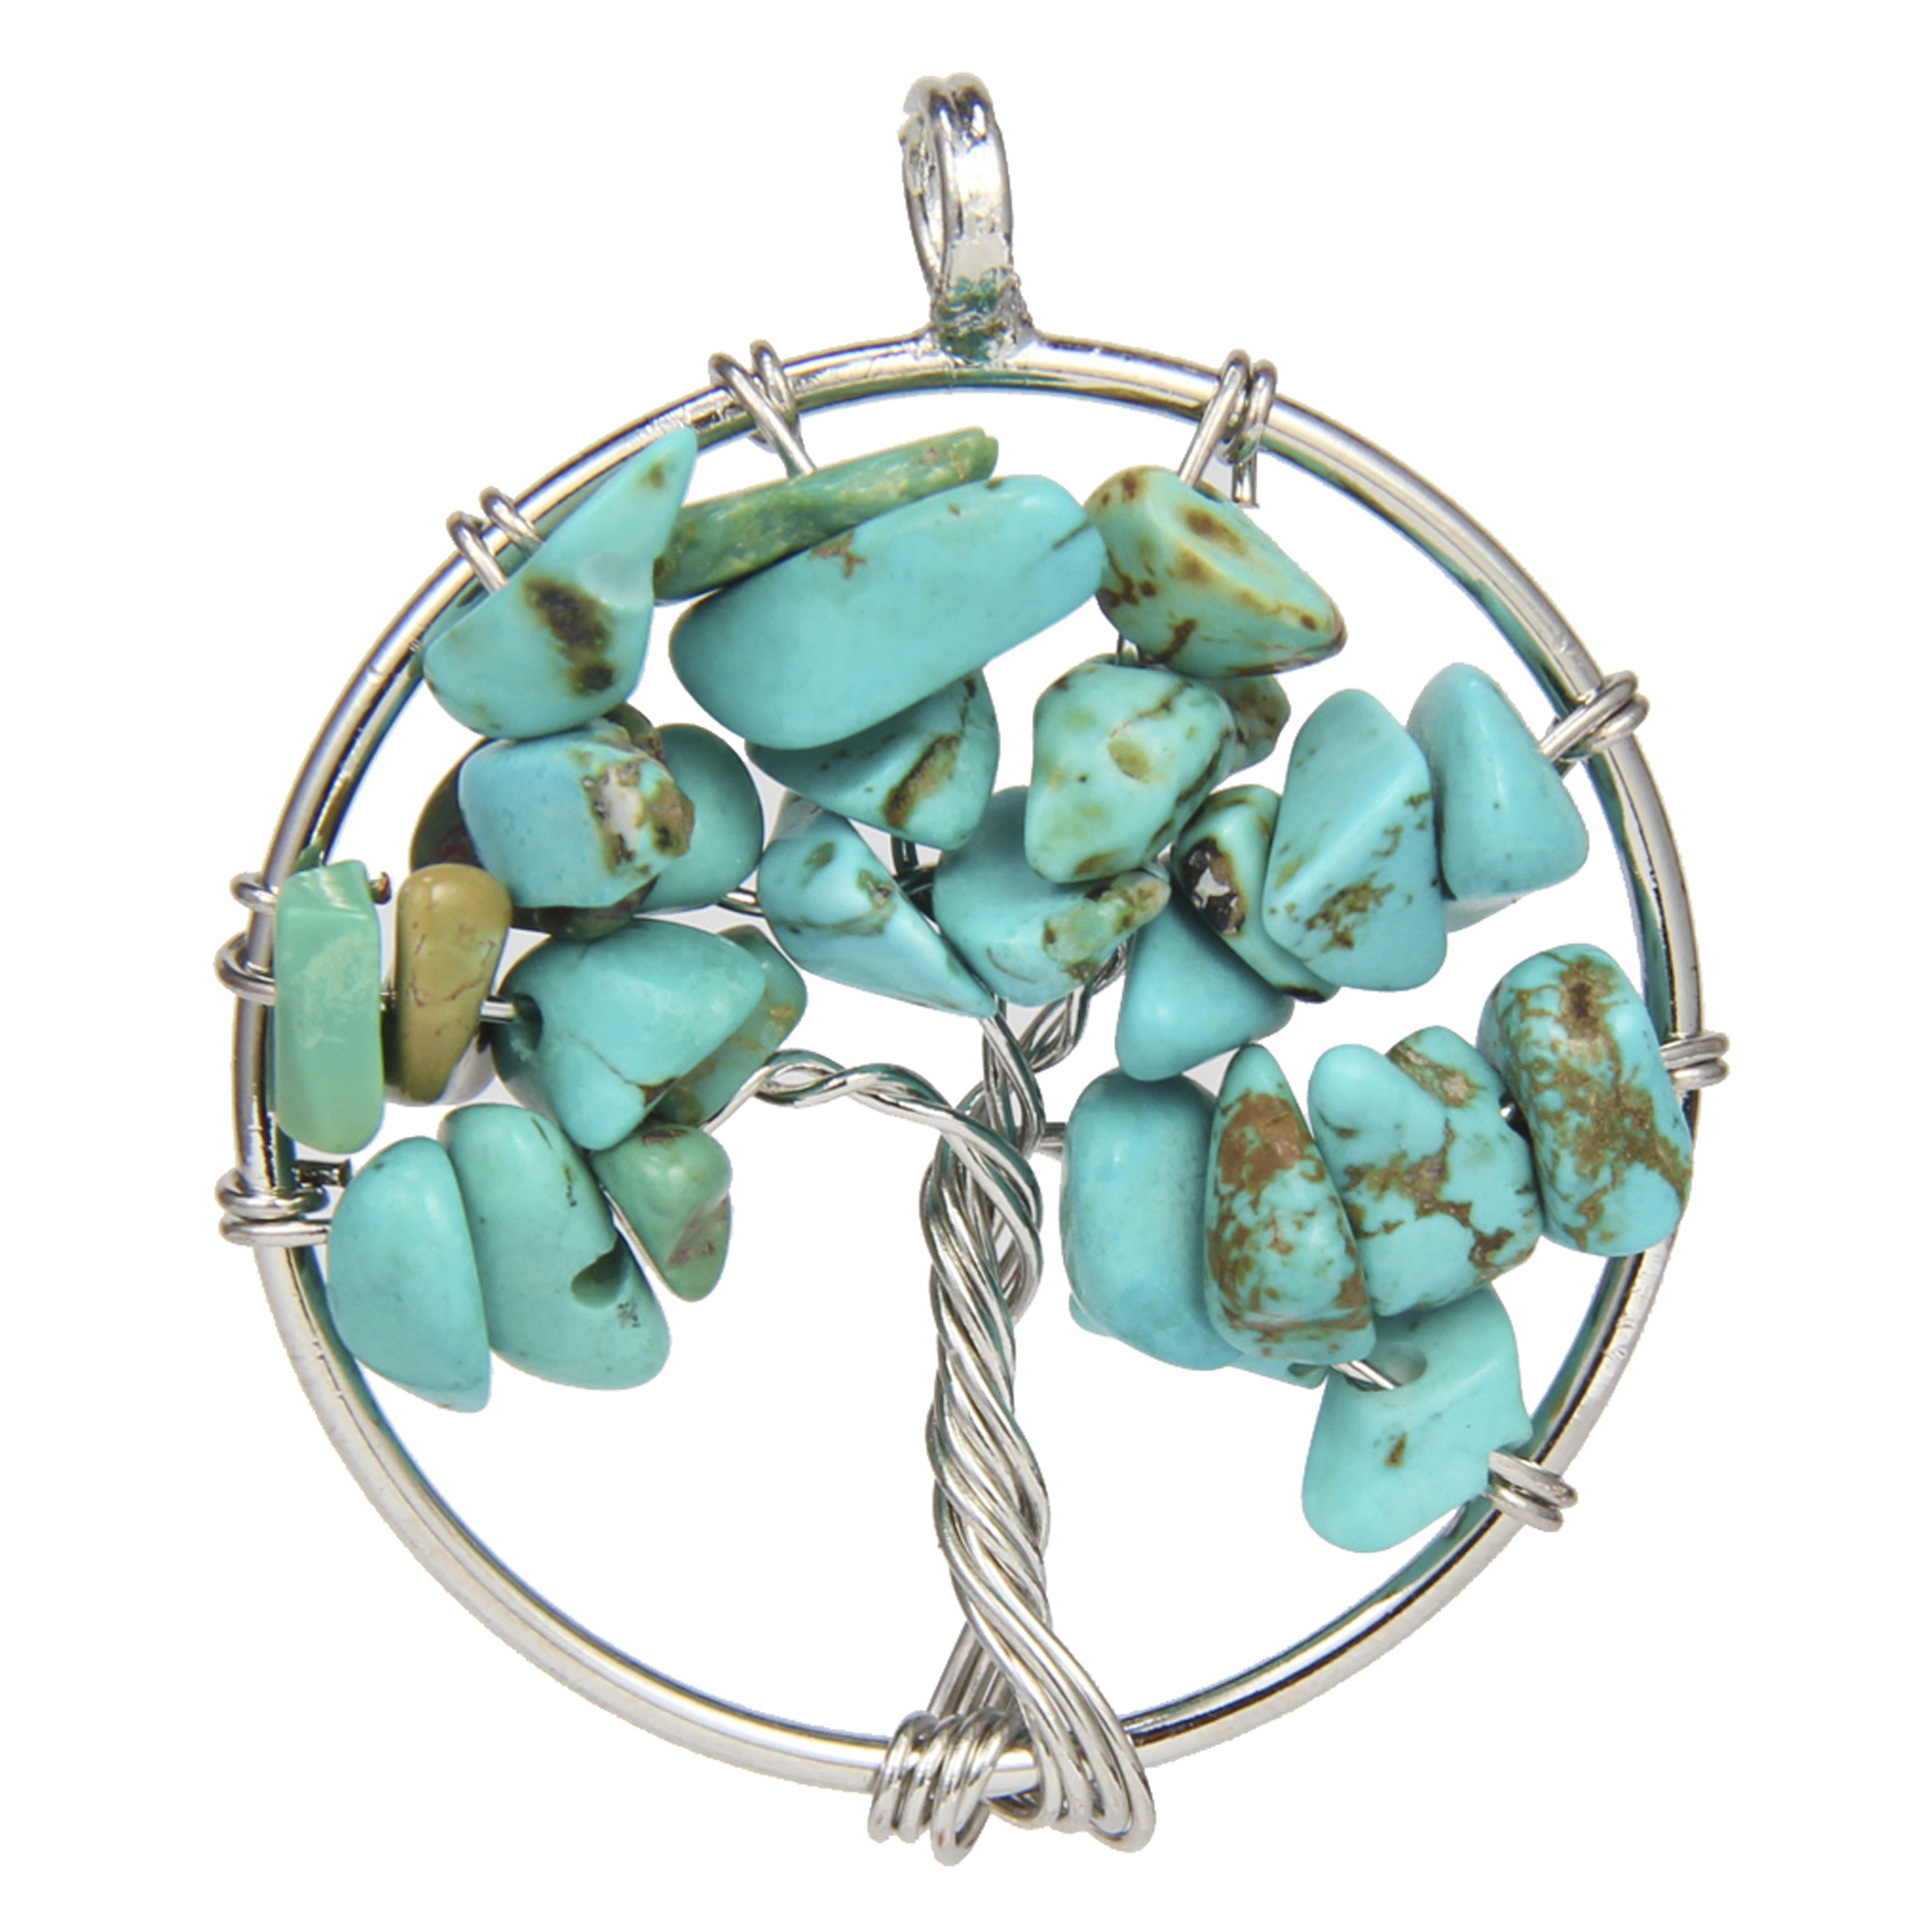 Silver-edged turquoise